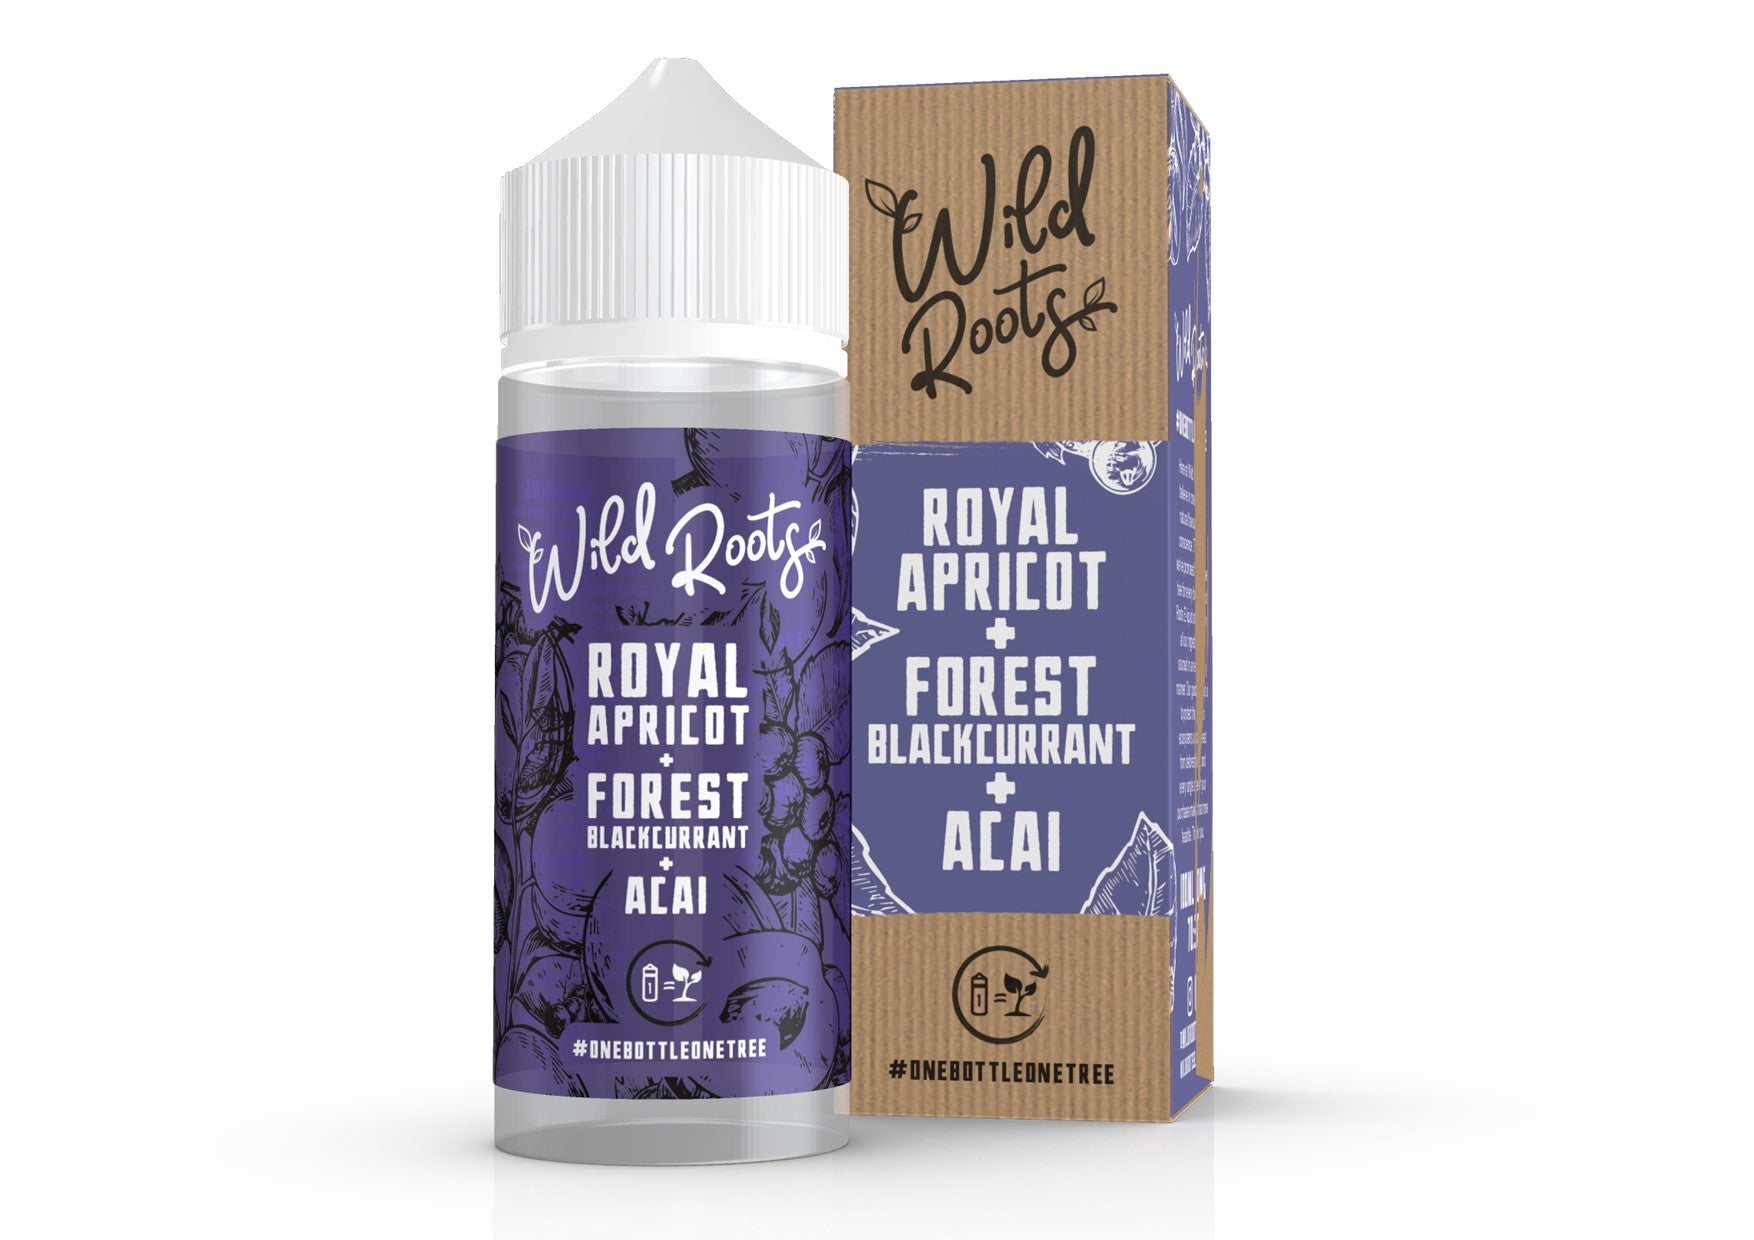 Wild Roots | Royal Apricot + Forest Blackcurrant + Acai